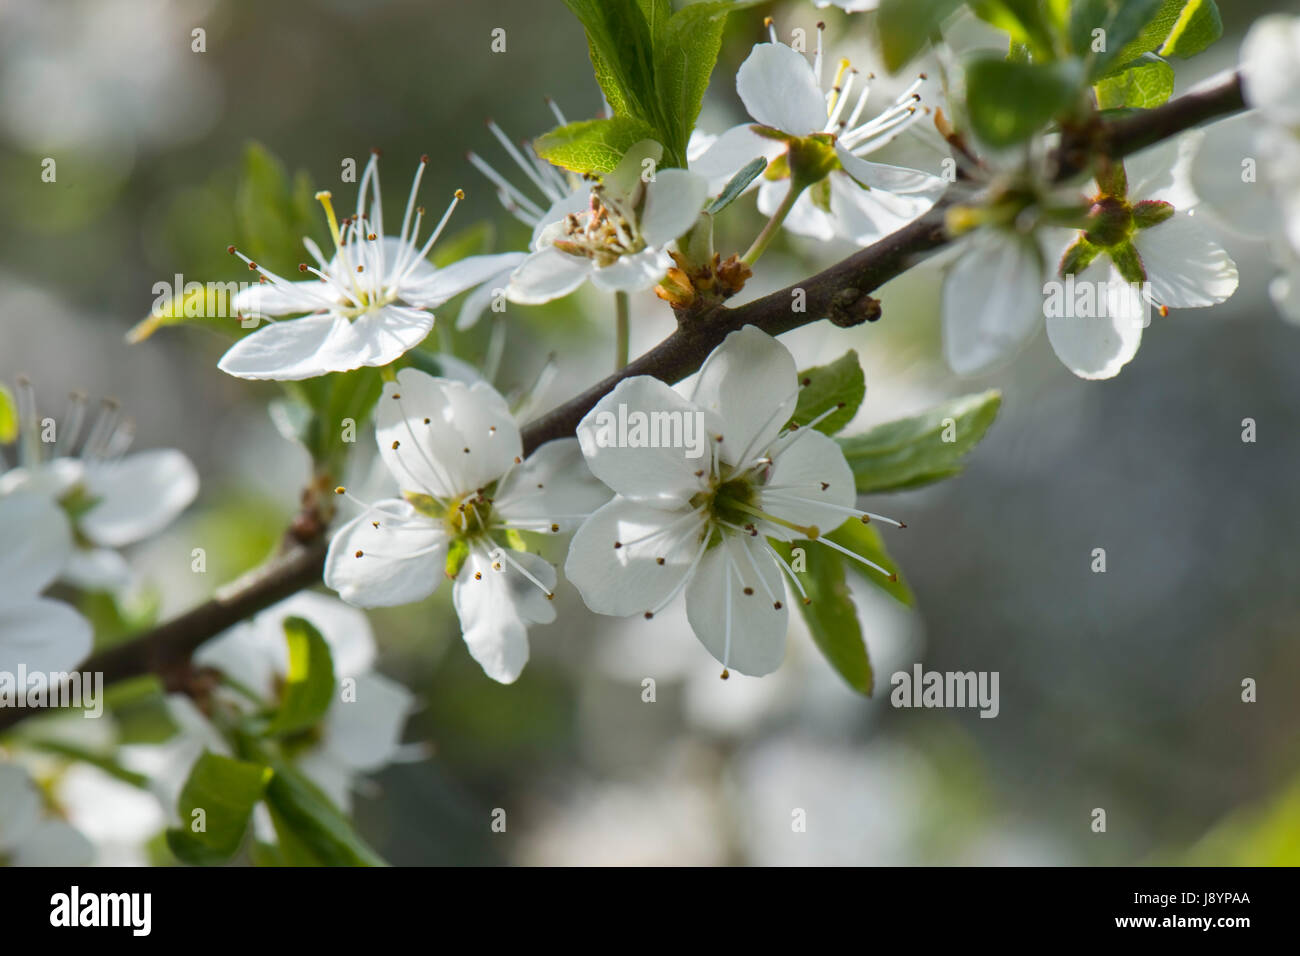 Blackthorn or sloe, Prunus spinosa, blossom with white profuse flowers backlit and ethereal on a sunny early spring day, Berkshire, April Stock Photo